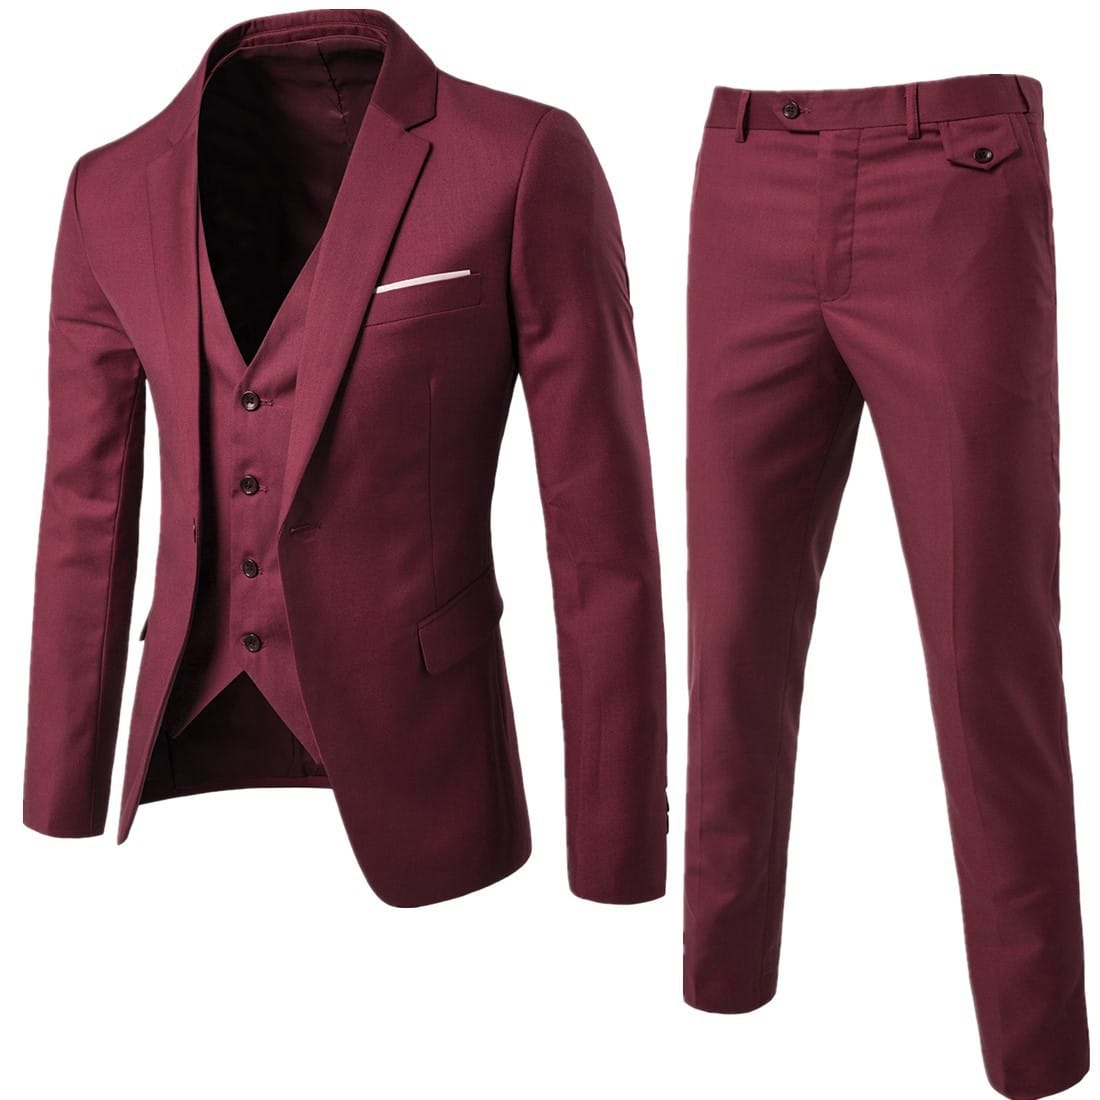 3 Piece Slim Fit Wine Red Suit for Party, Wedding & Events